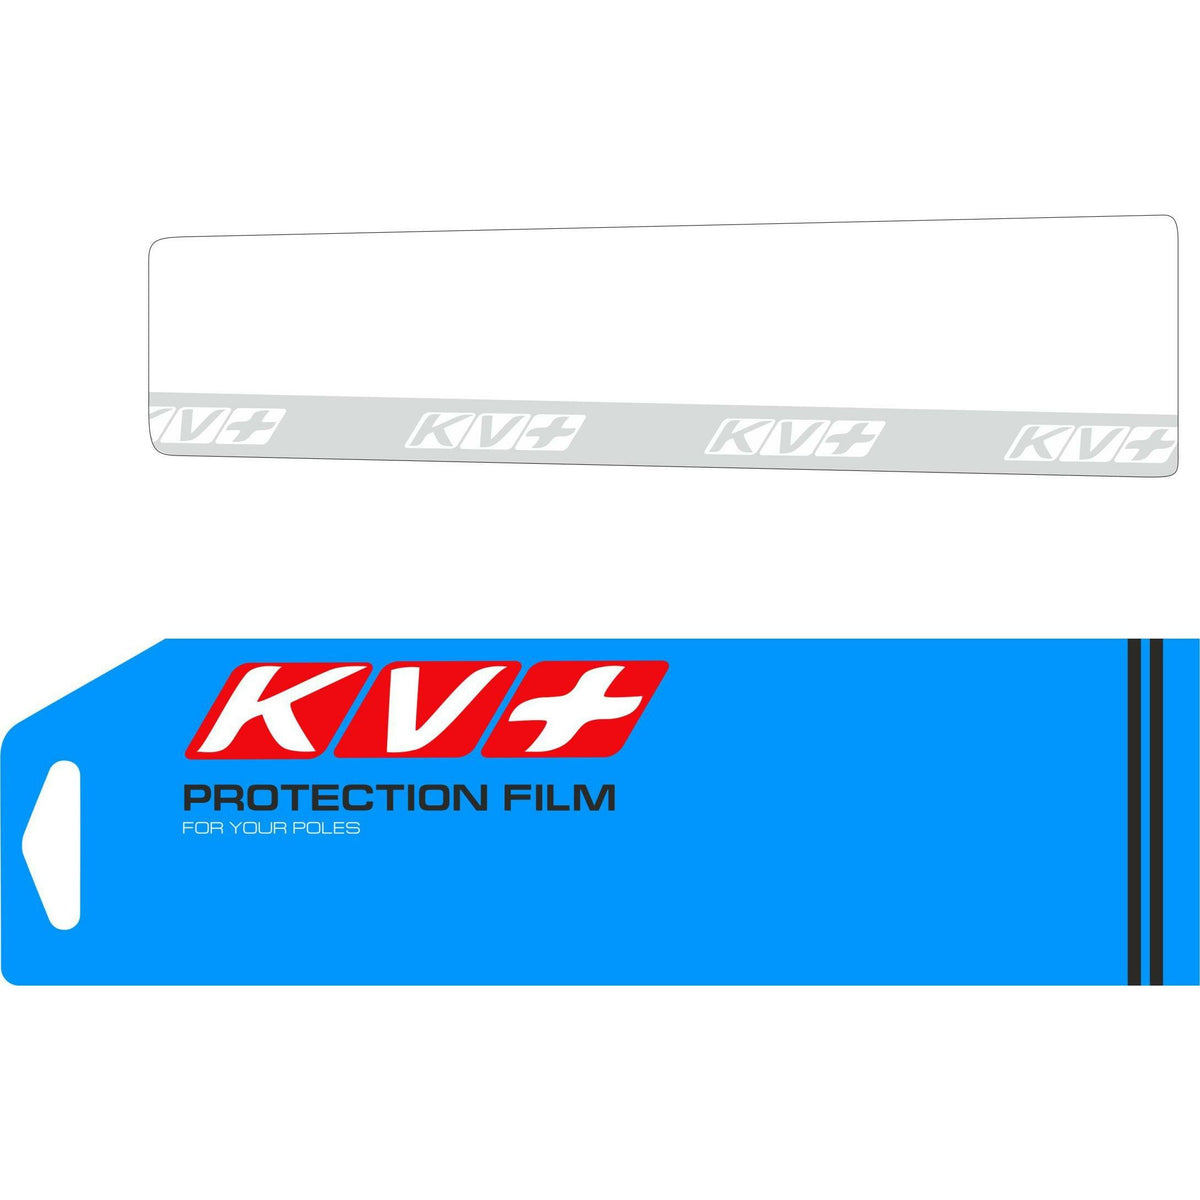 KV+ Protection Film for Shafts - Pioneer Midwest